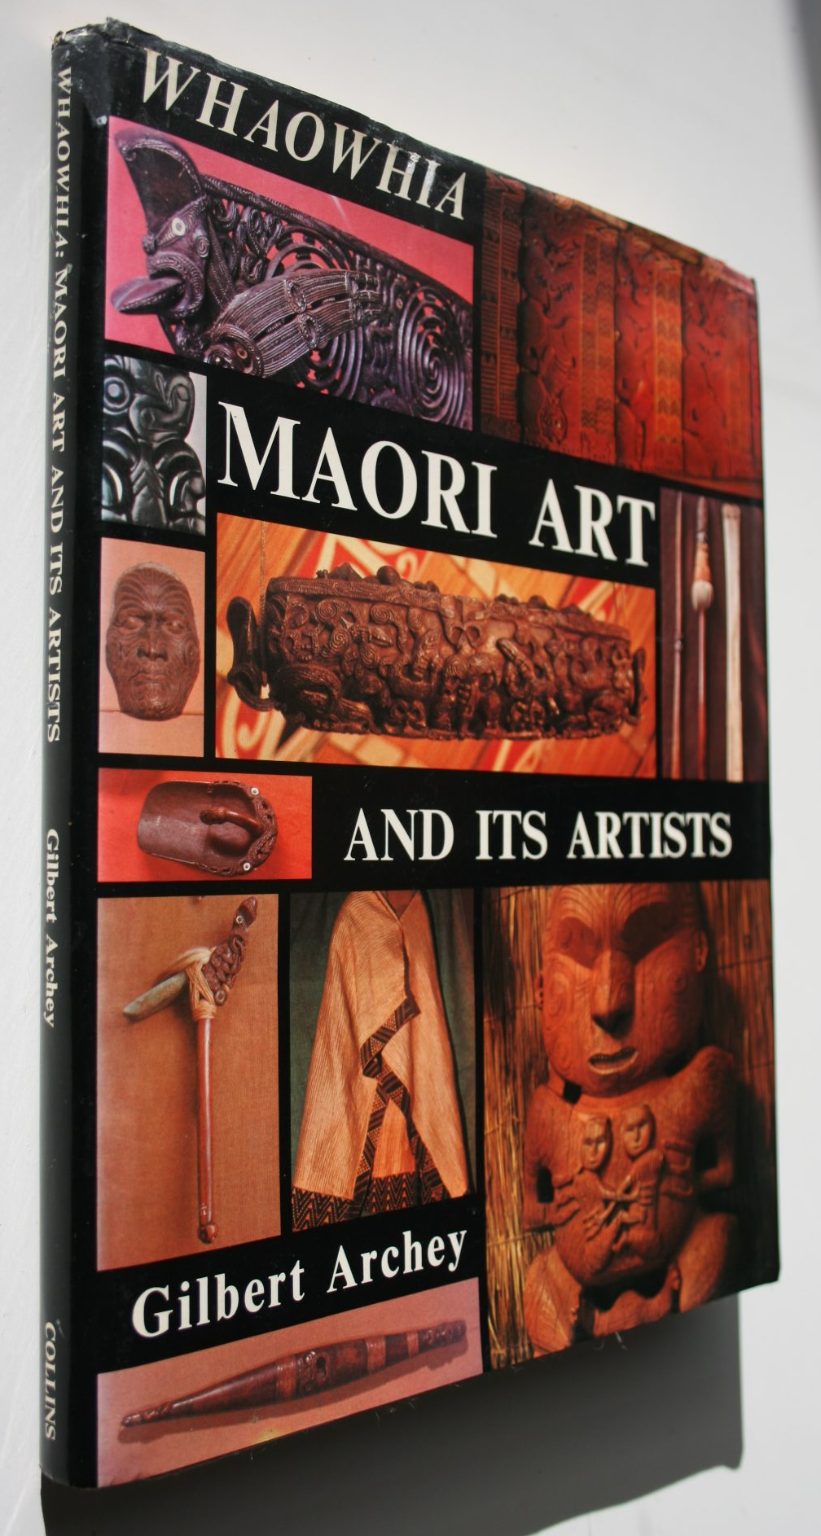 Whaowhia Maori Art and its Artists by Gilbert Archey.